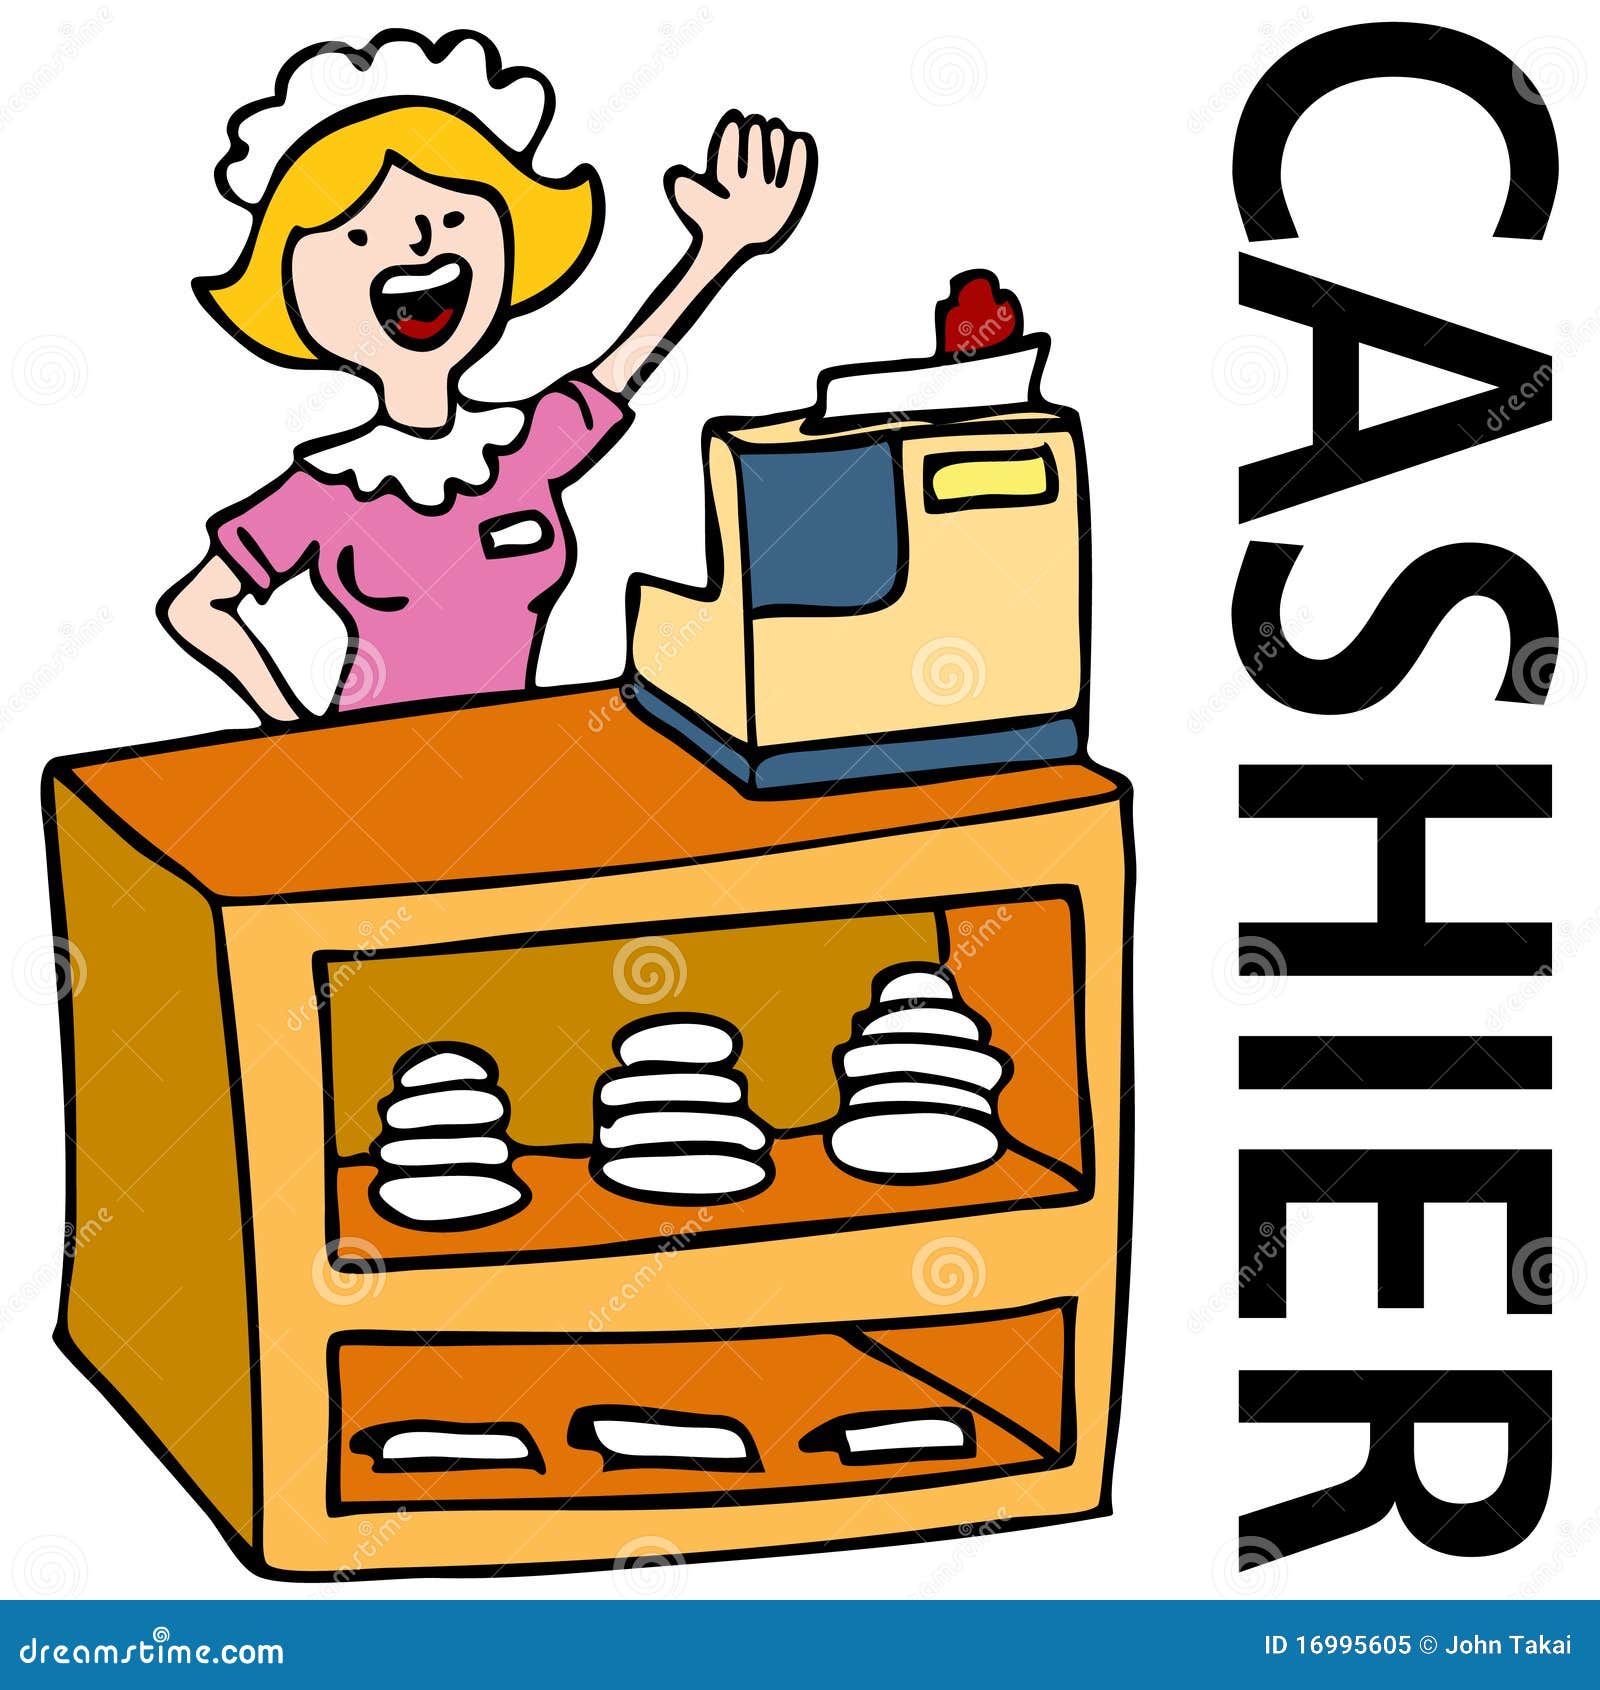 clipart of cafeteria workers - photo #2